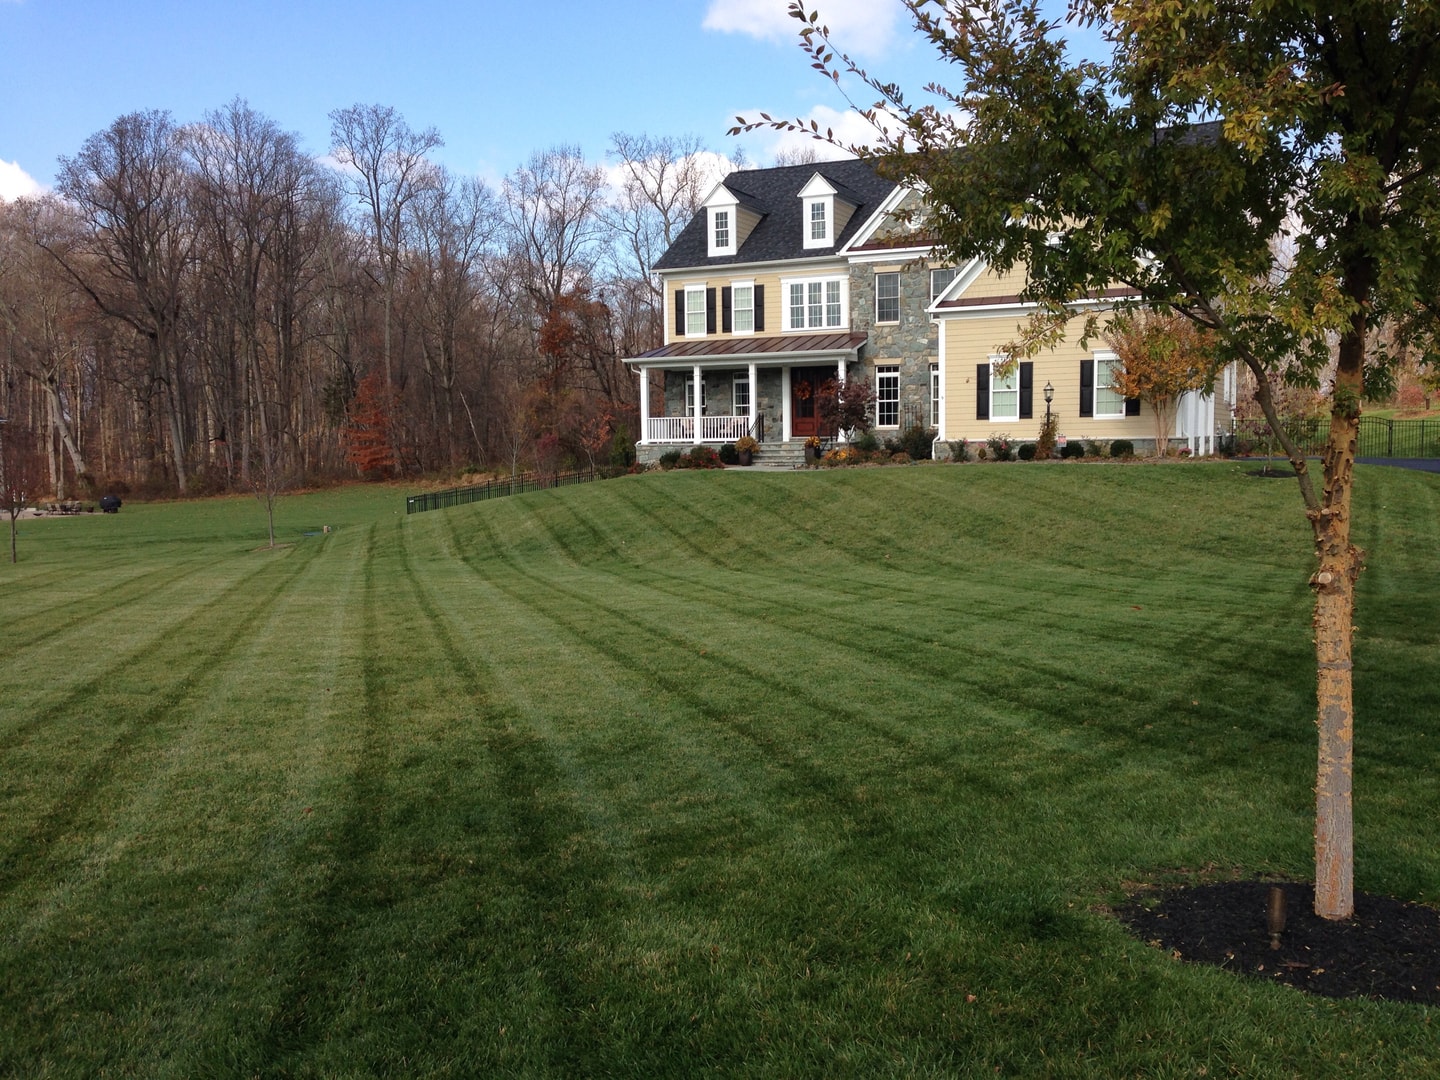 Learn why it’s important that your grass is maintained at its ideal height.